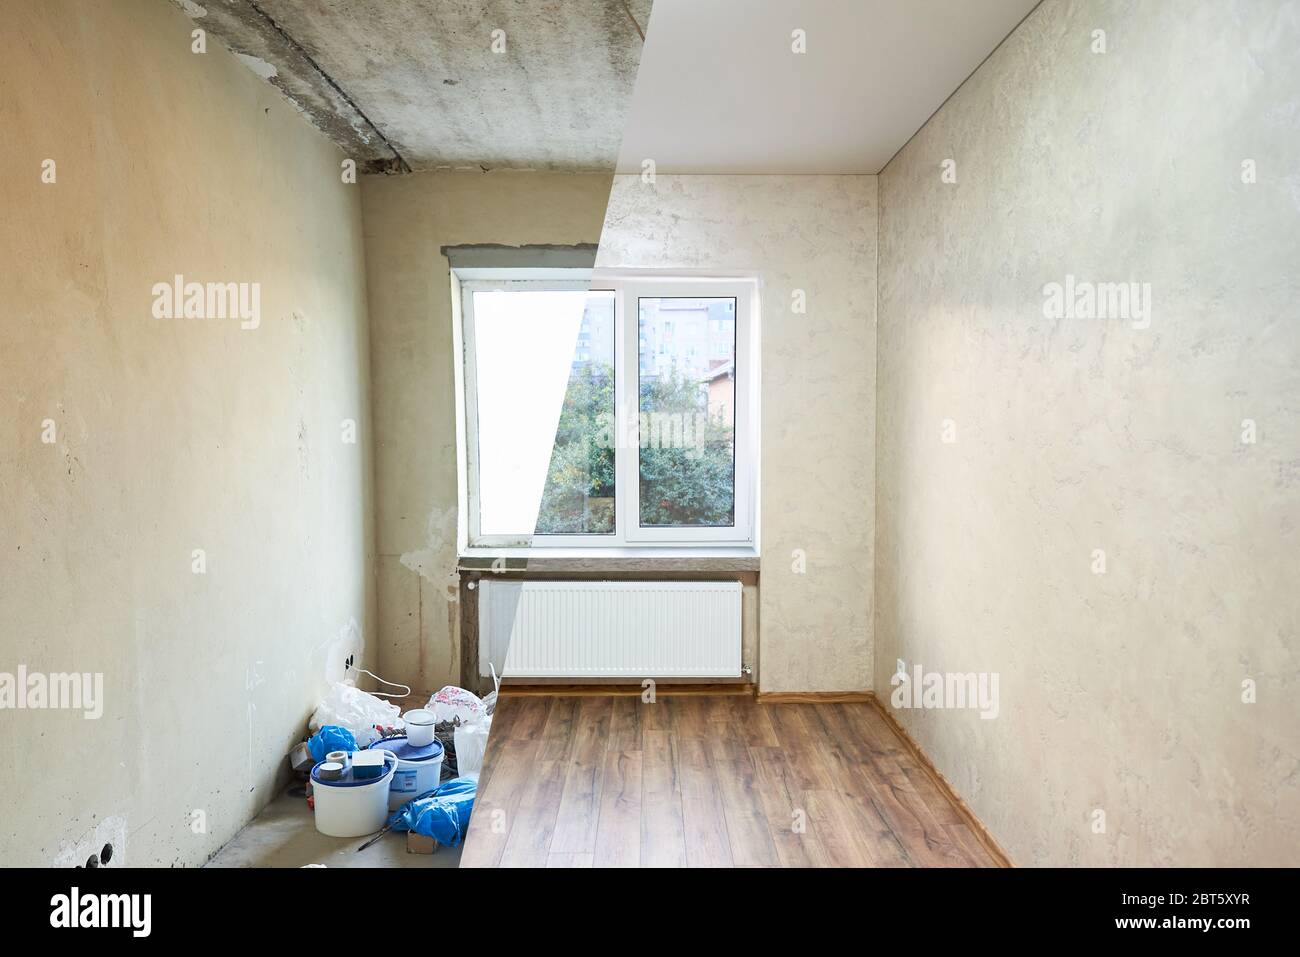 Room in private house before and after renovation works, window, sill, light wallpapers and wood textured laminate, renovation concept Stock Photo